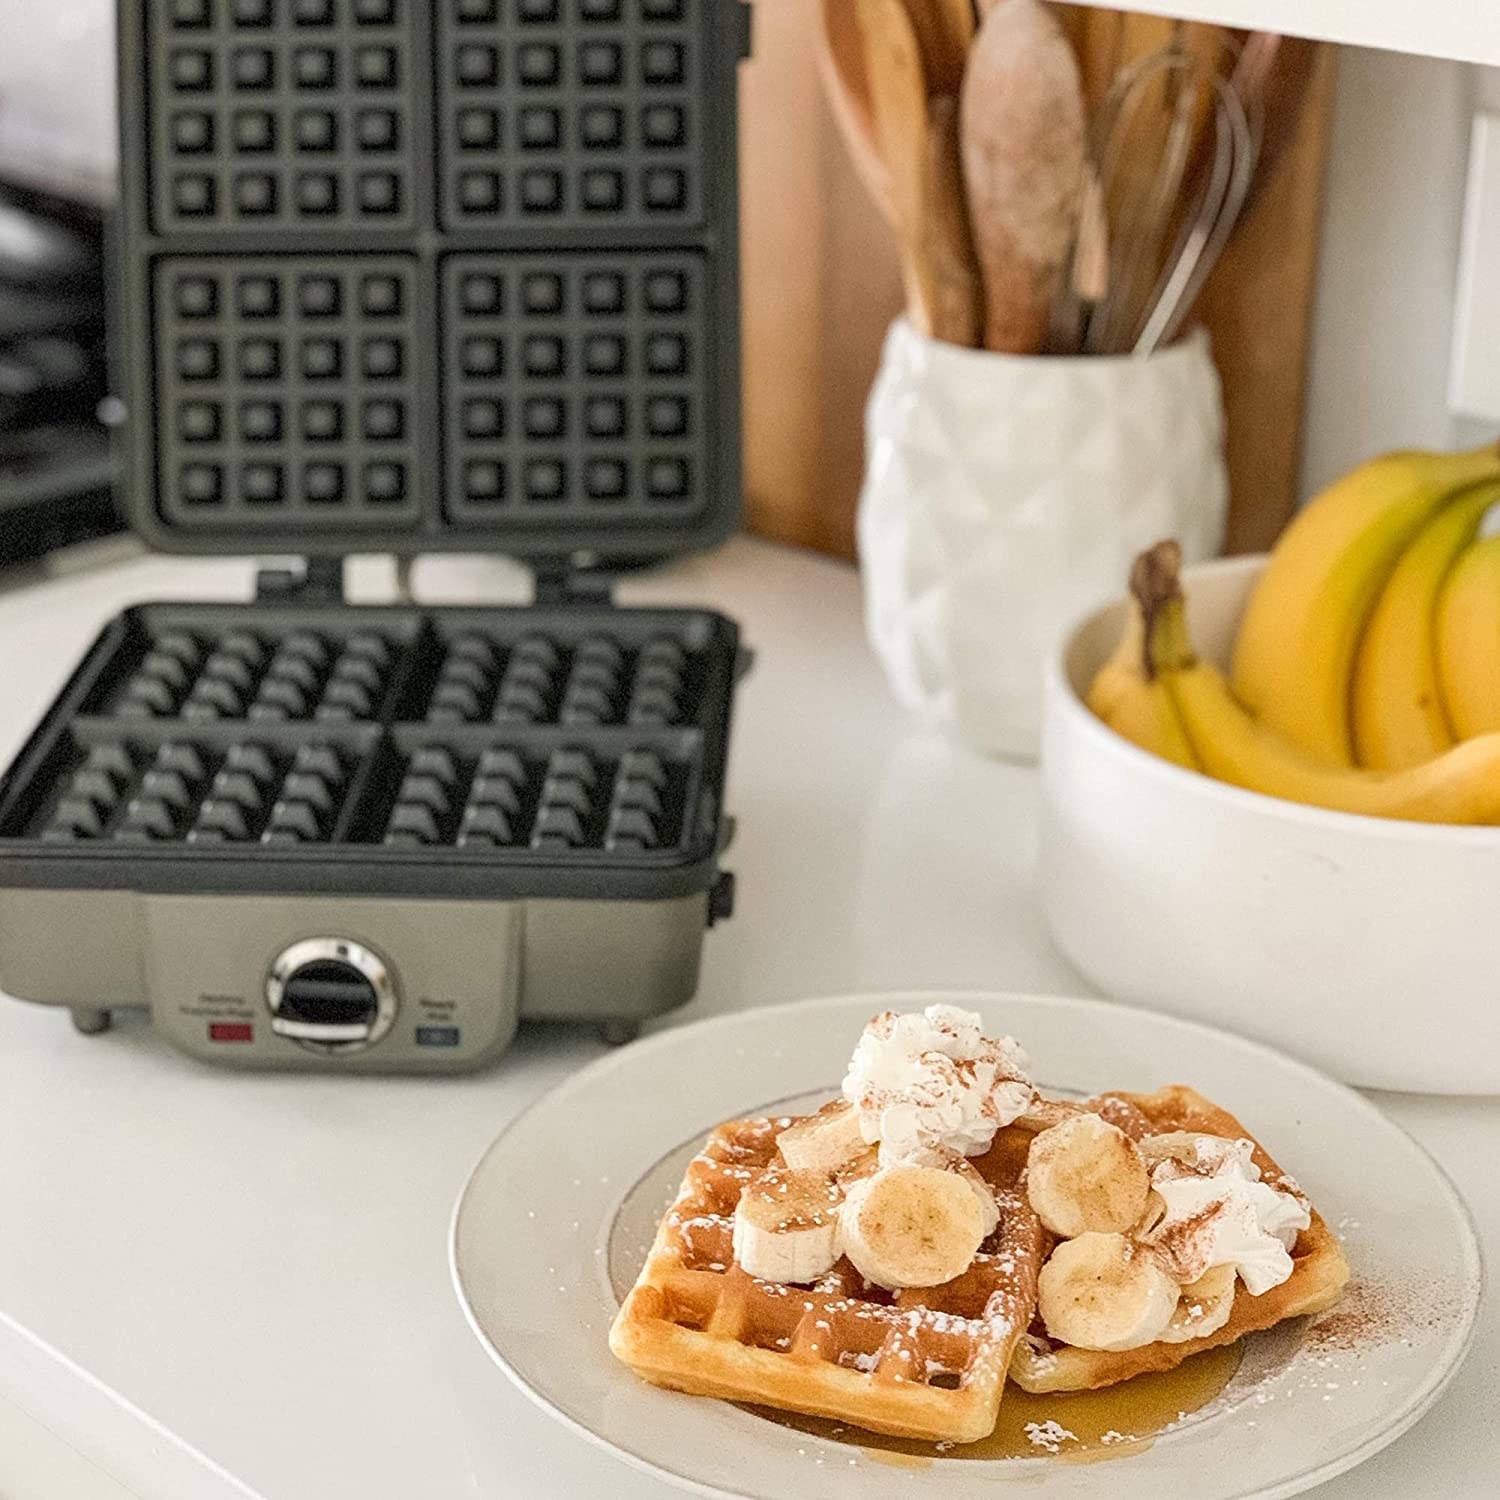 Waffles on a plate in front of the waffle maker